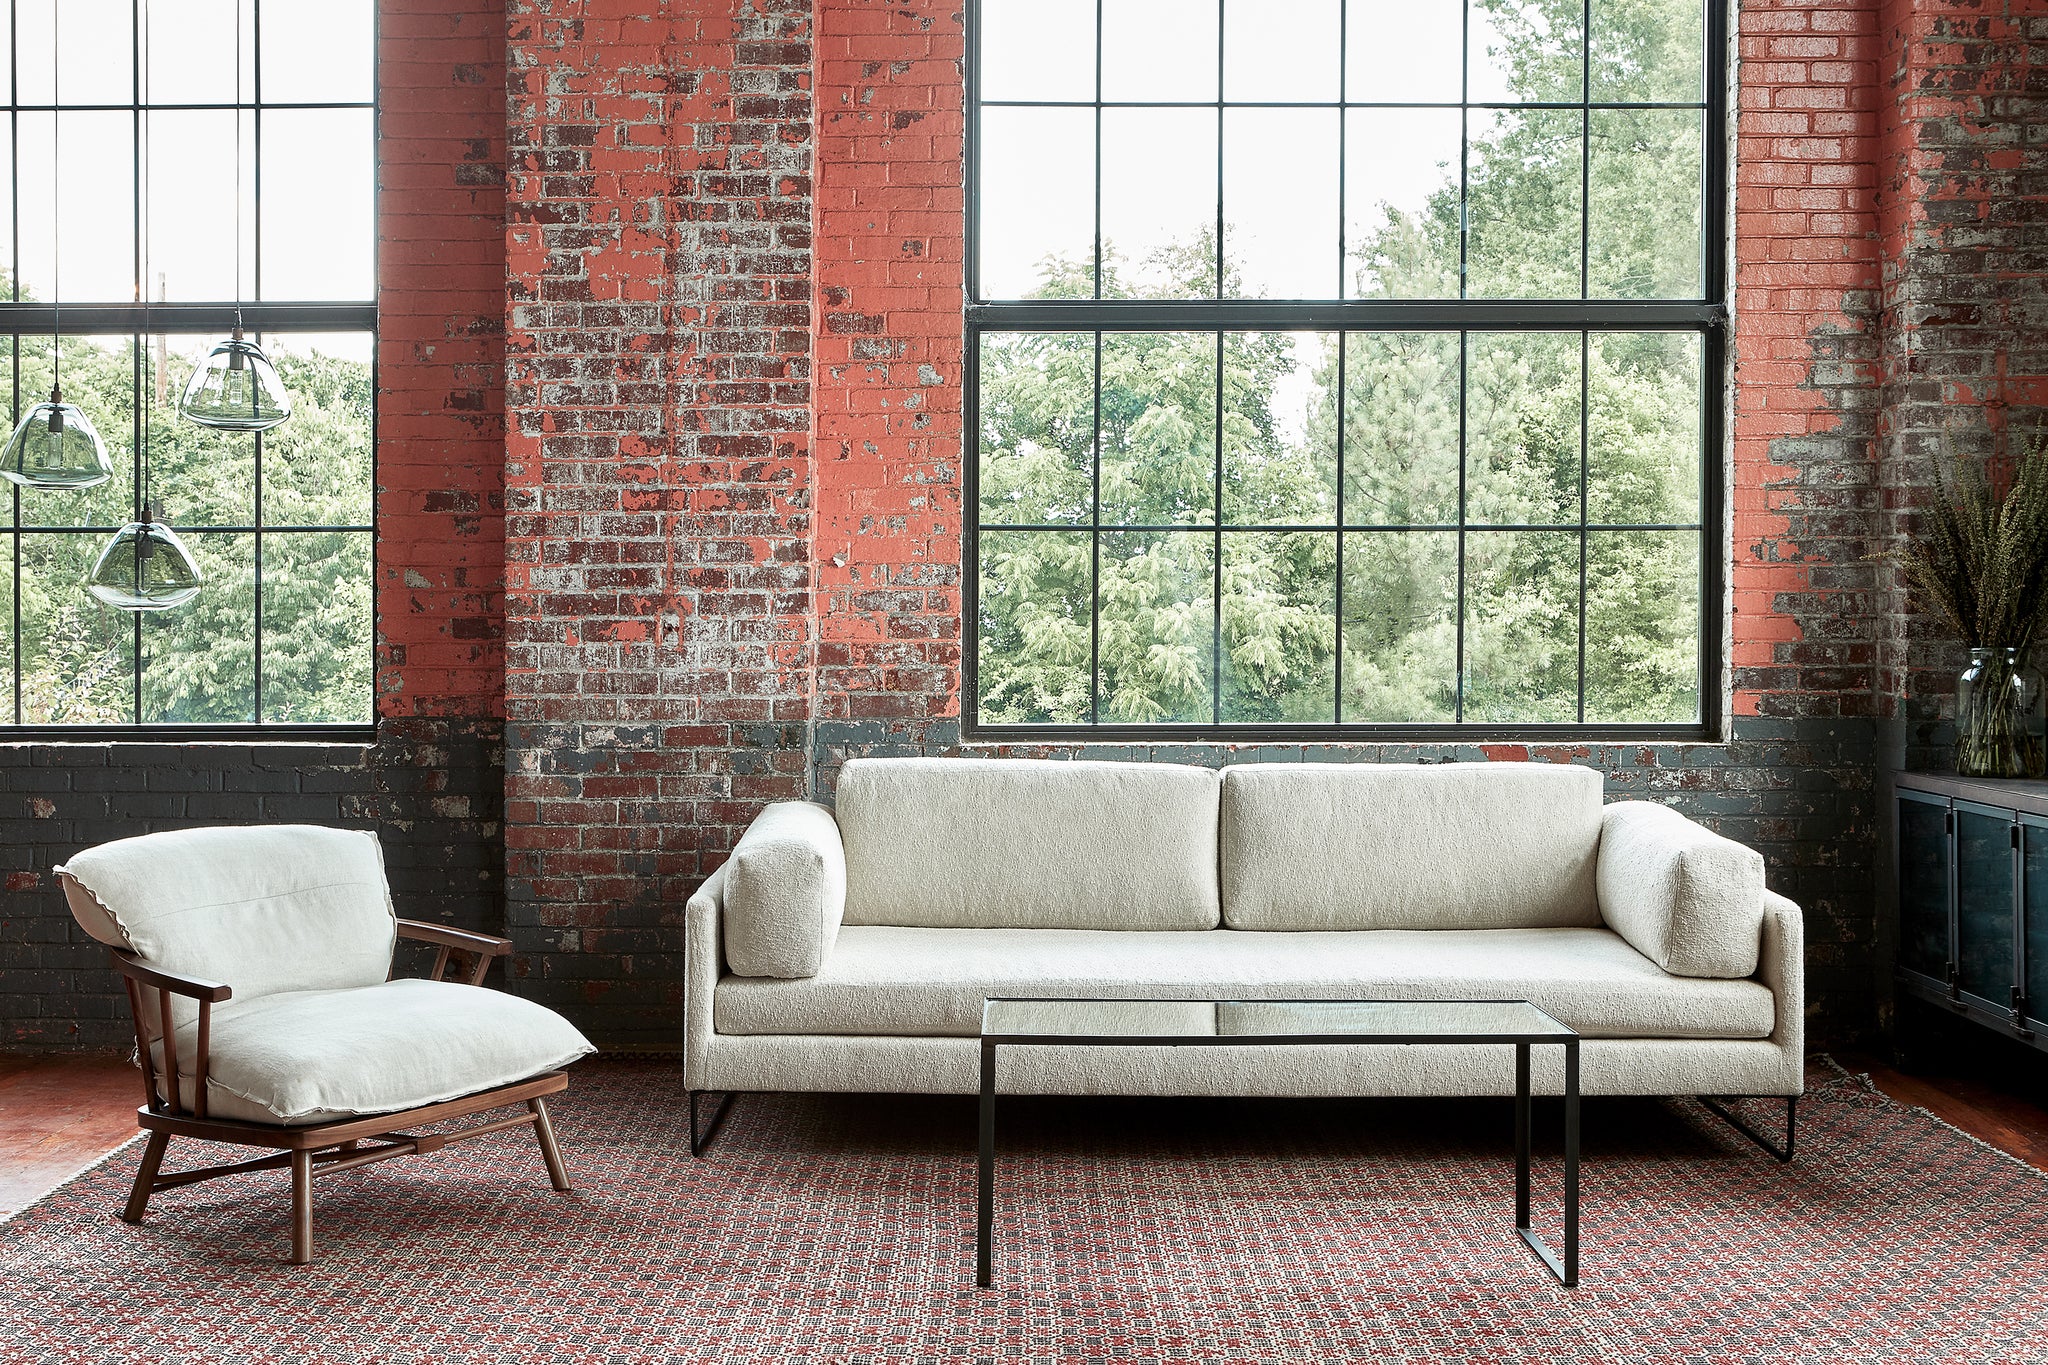  A sofa with 2 back cushions and side pillows in a textured neutral fabric in front of an orange vintage brick wall with 3 smoke glass lights and large industrial windows. There is a chair with a wood frame and a neutral linen cushion on the left side. In front of the sofa, there is a metal and glass coffee table. On the right there is a metal and glass credenza with a large flower arrangement. The rug is dark red and grey with a geometric pattern. Photographed in Segura Natural. 